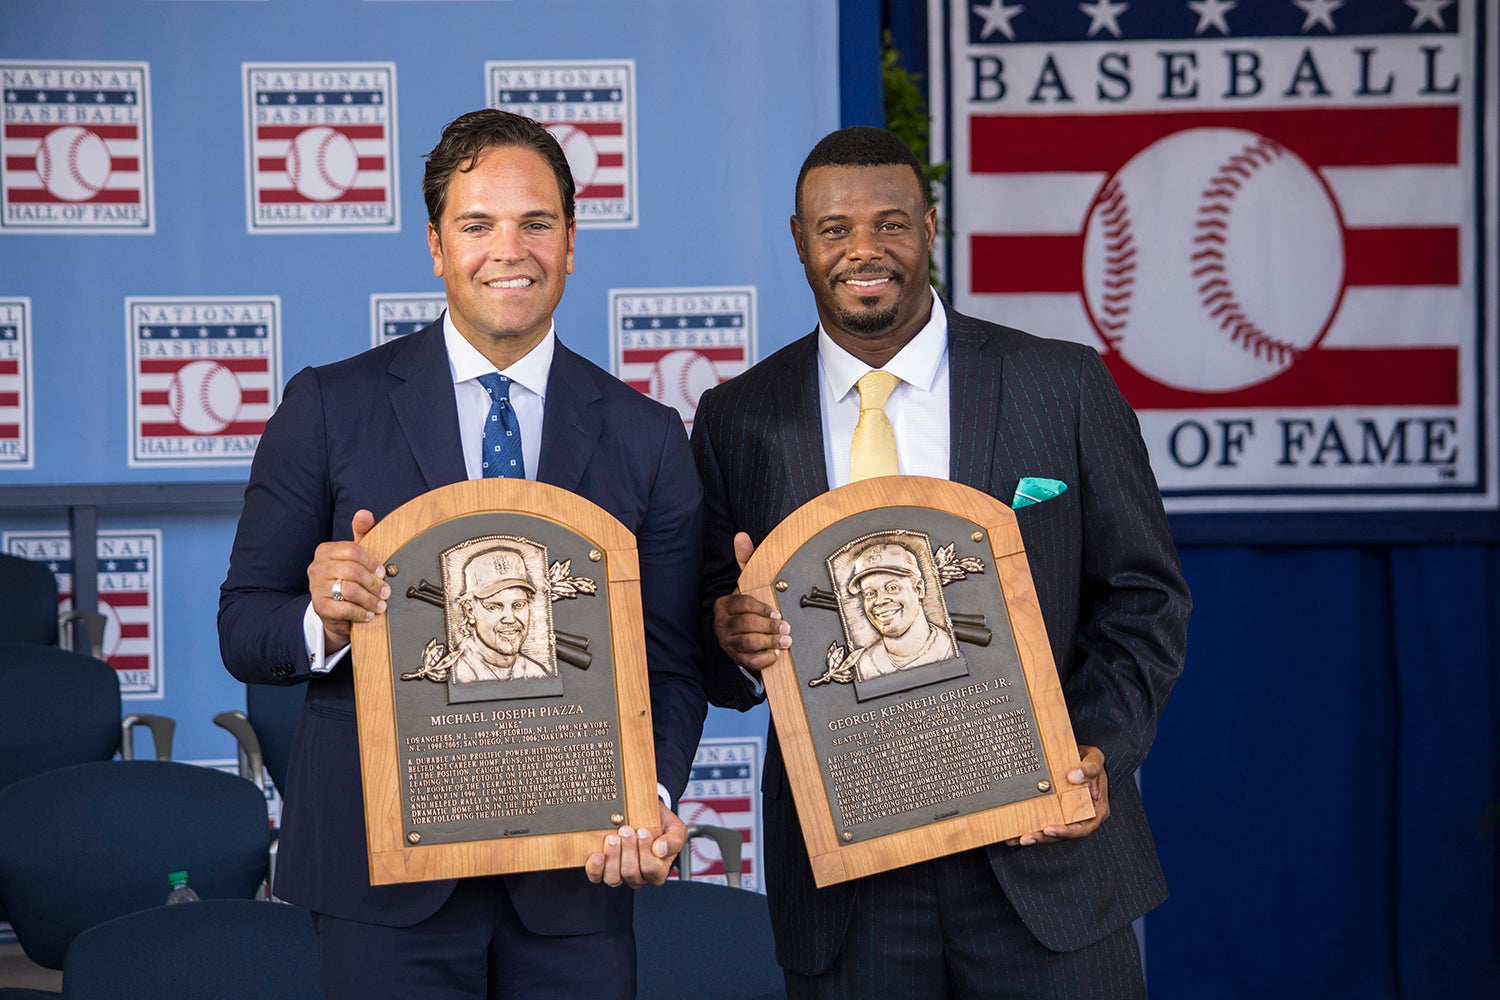 Historic crowd cheers Griffey, Piazza into Hall of Fame